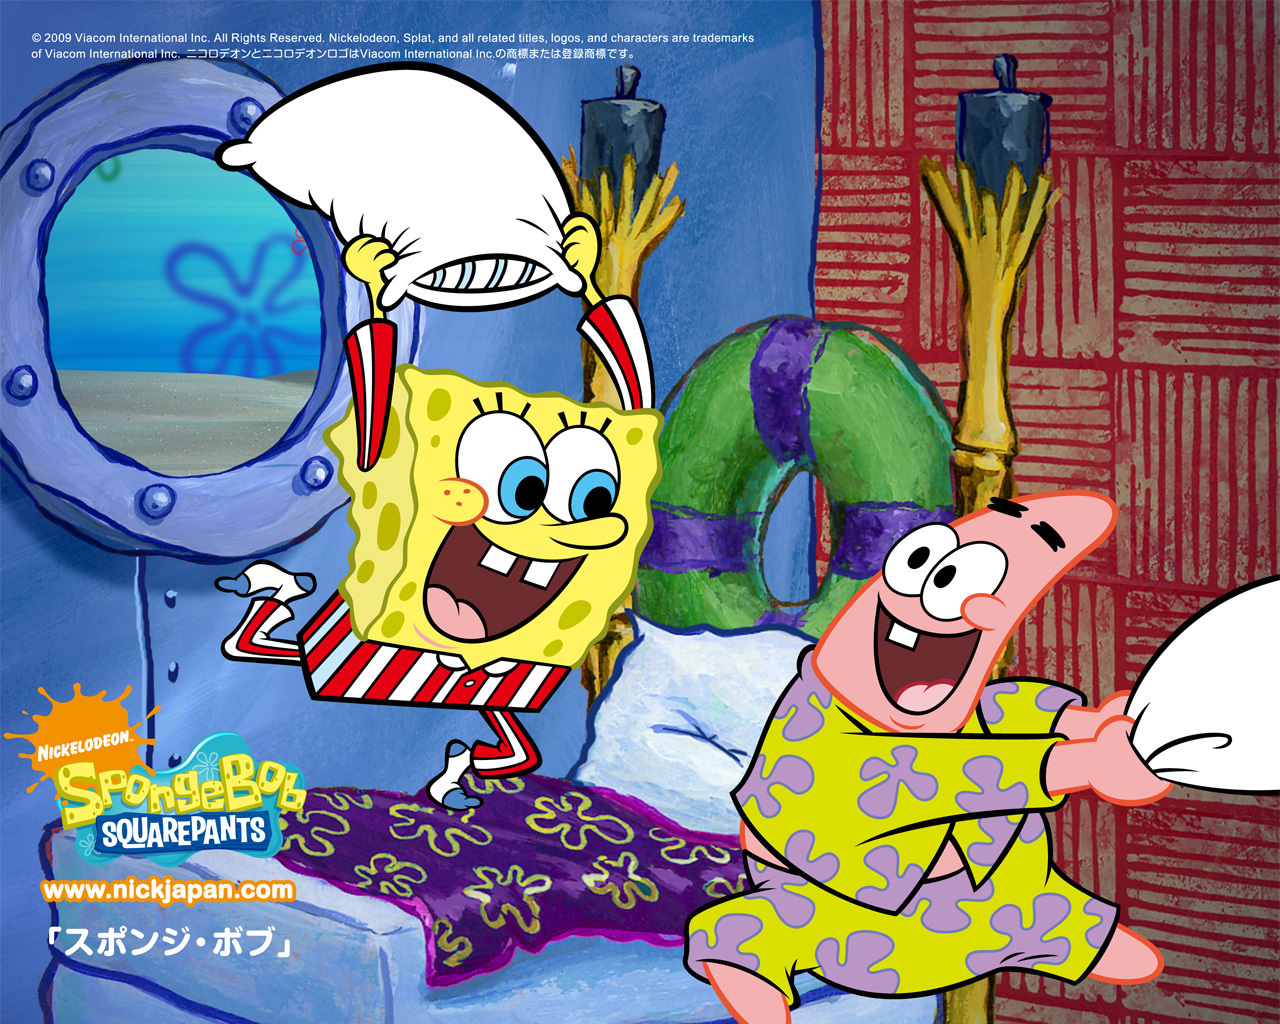 Squarepants Image Pillow Fight HD Wallpaper And Background Photos